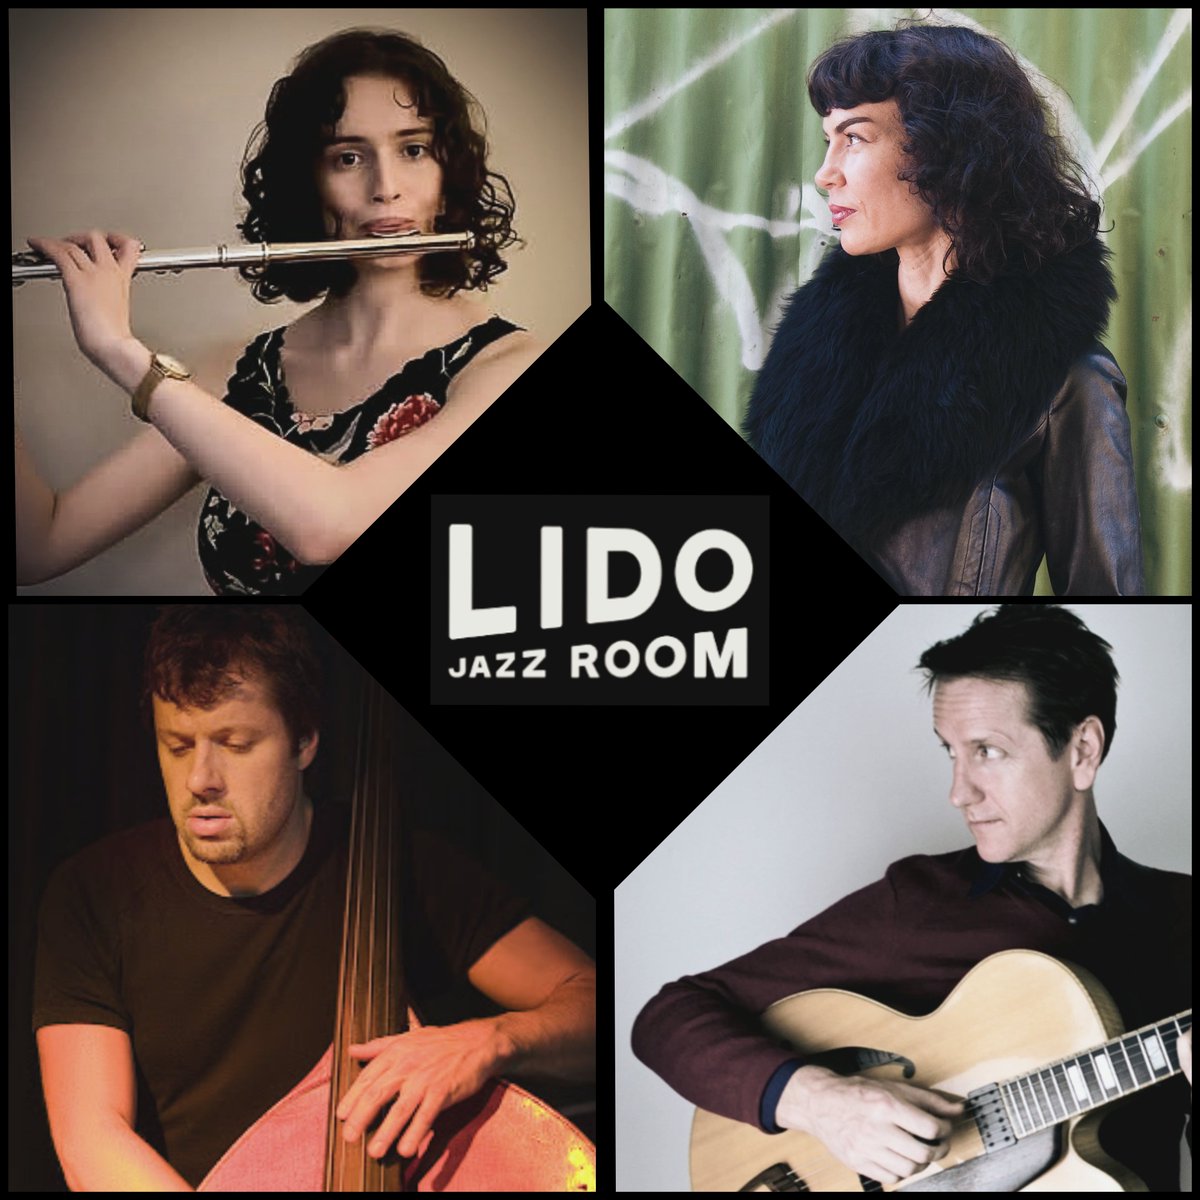 TONIGHT! Brave the hot car ride and come down to Lido Jazz Room for some coowel tunes with moi, James Sherlock, Yael Zamir and Philip Rex. Jan 14th 8pm🎶🍸 Tix: bit.ly/2DVDgwJ @lidocinemas #jazz #melbournejazz #bossanova #jazzclub #whatsonmelbourne #gigs